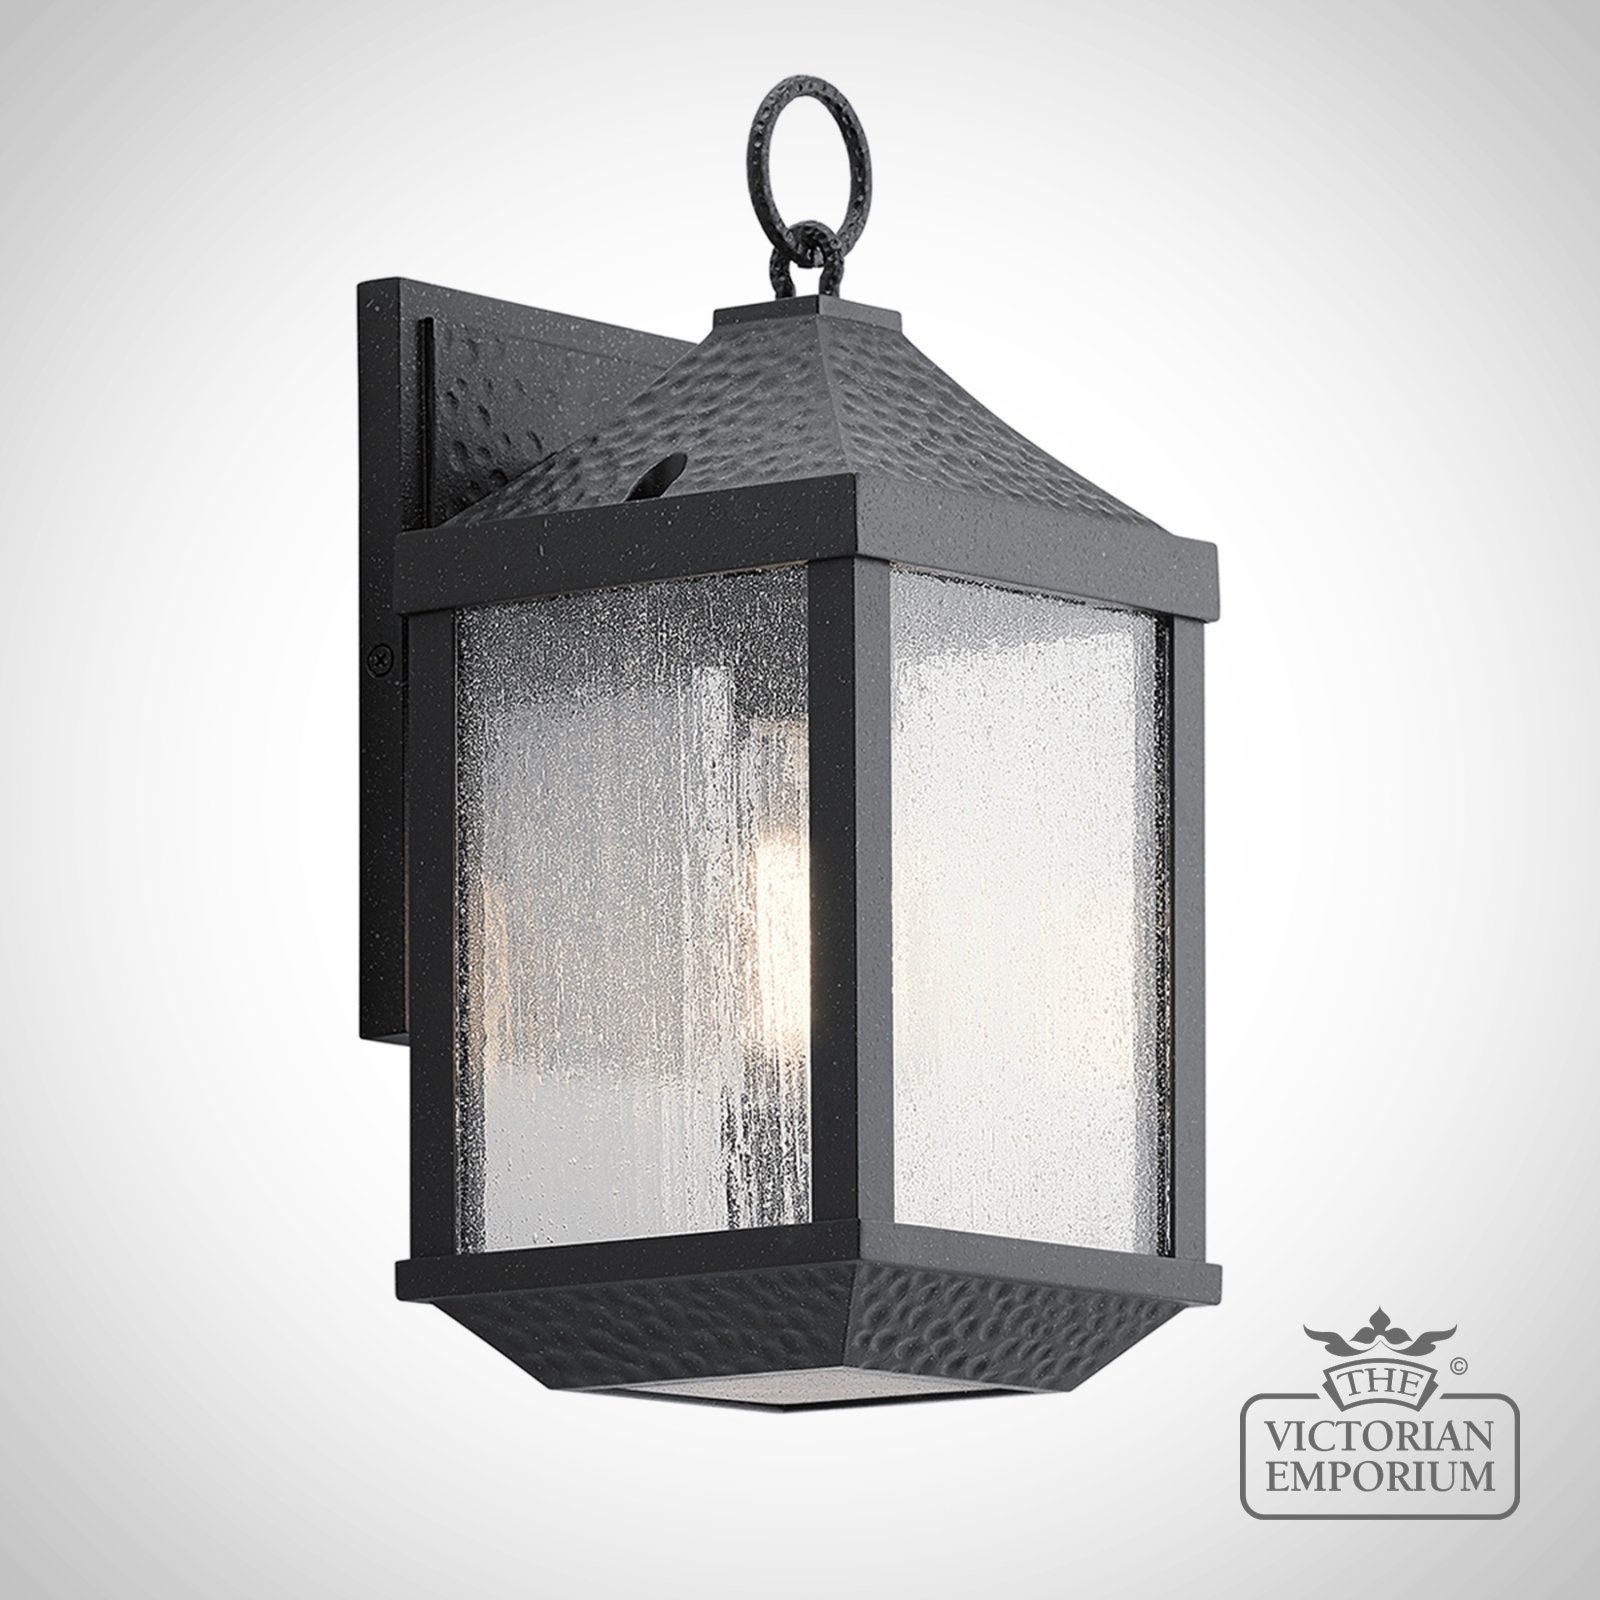 Springfield exterior wall light in black in a choice of two sizes